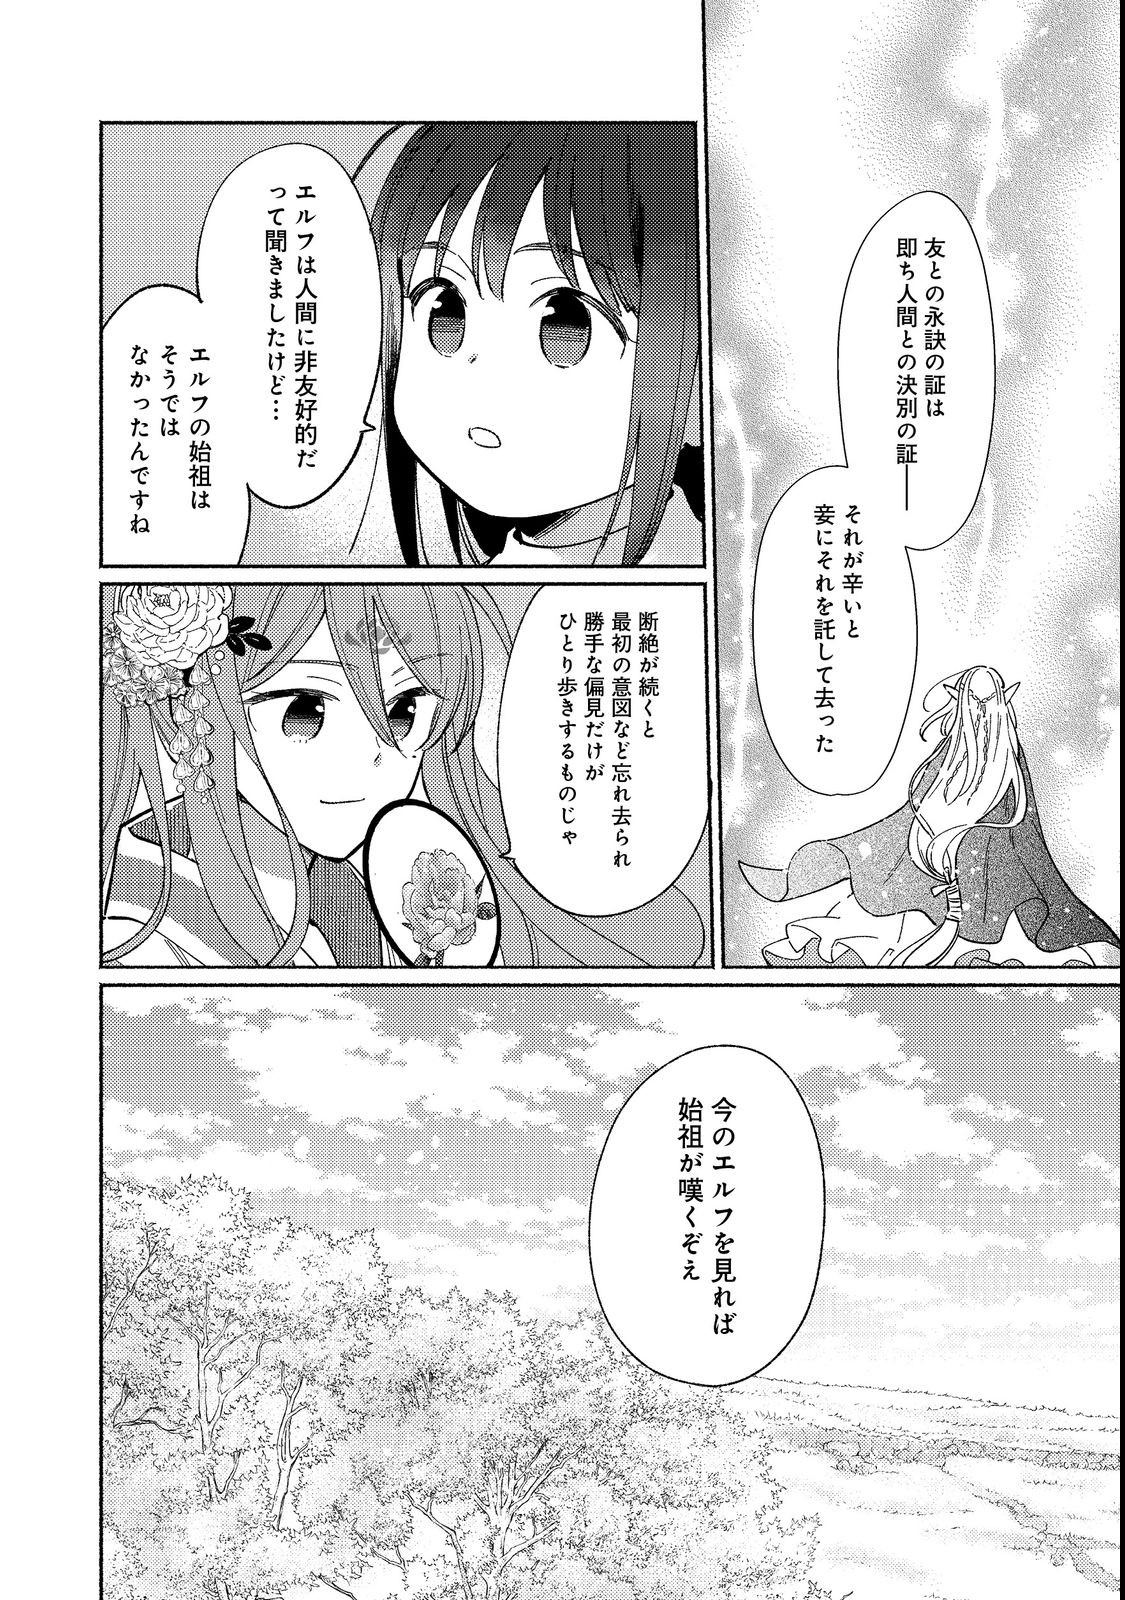 I’m the White Pig Nobleman 第17.2話 - Page 9